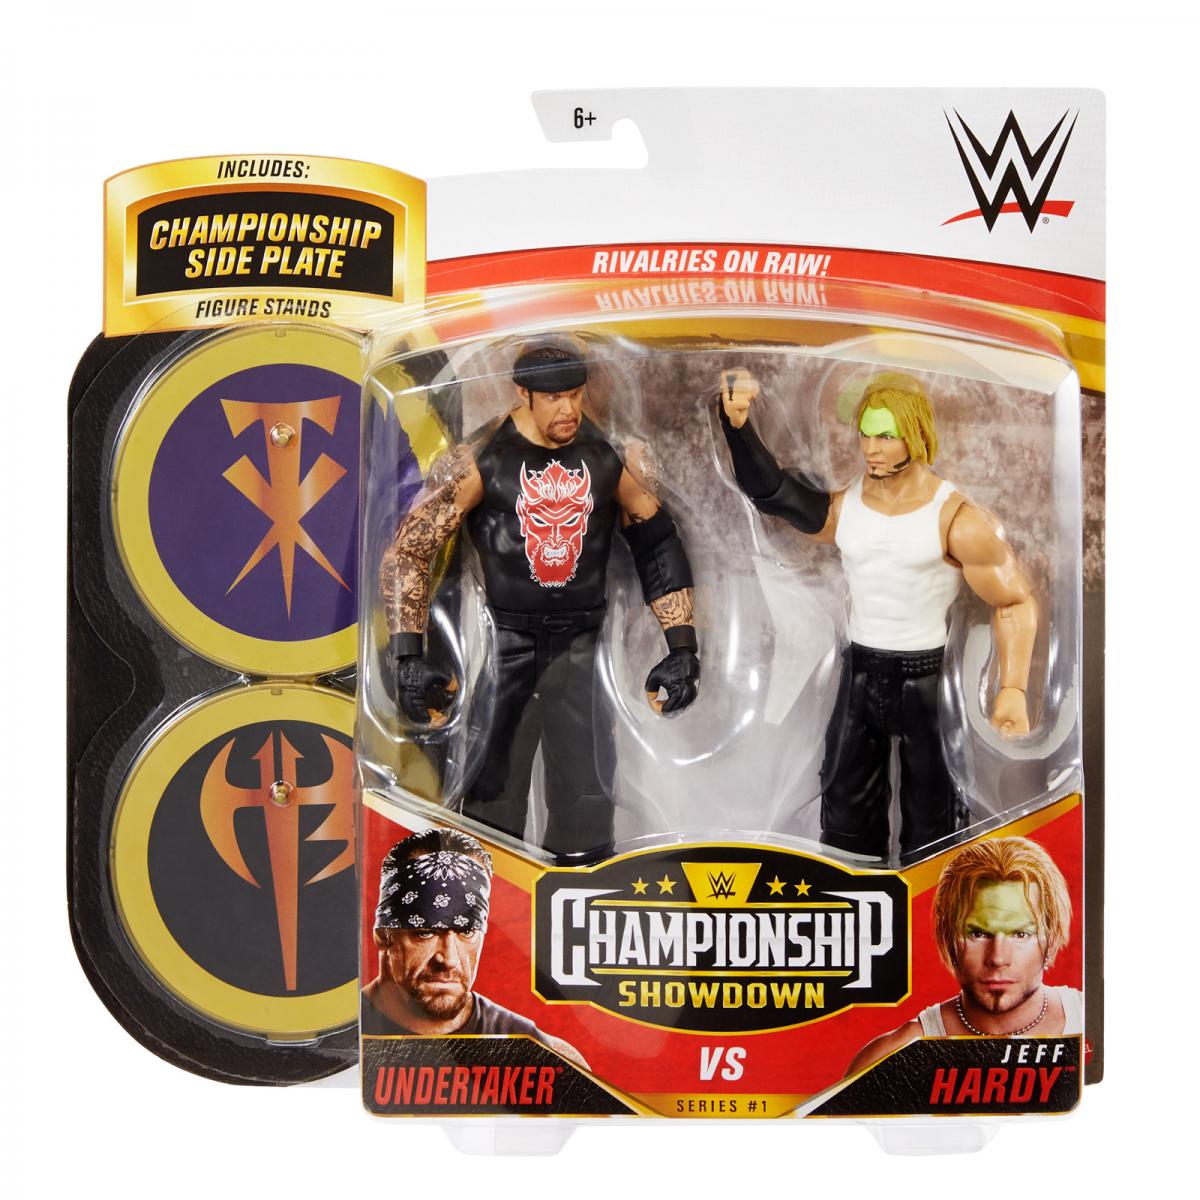 New AEW Action Figures Revealed, Exclusives Up For Pre-Order on